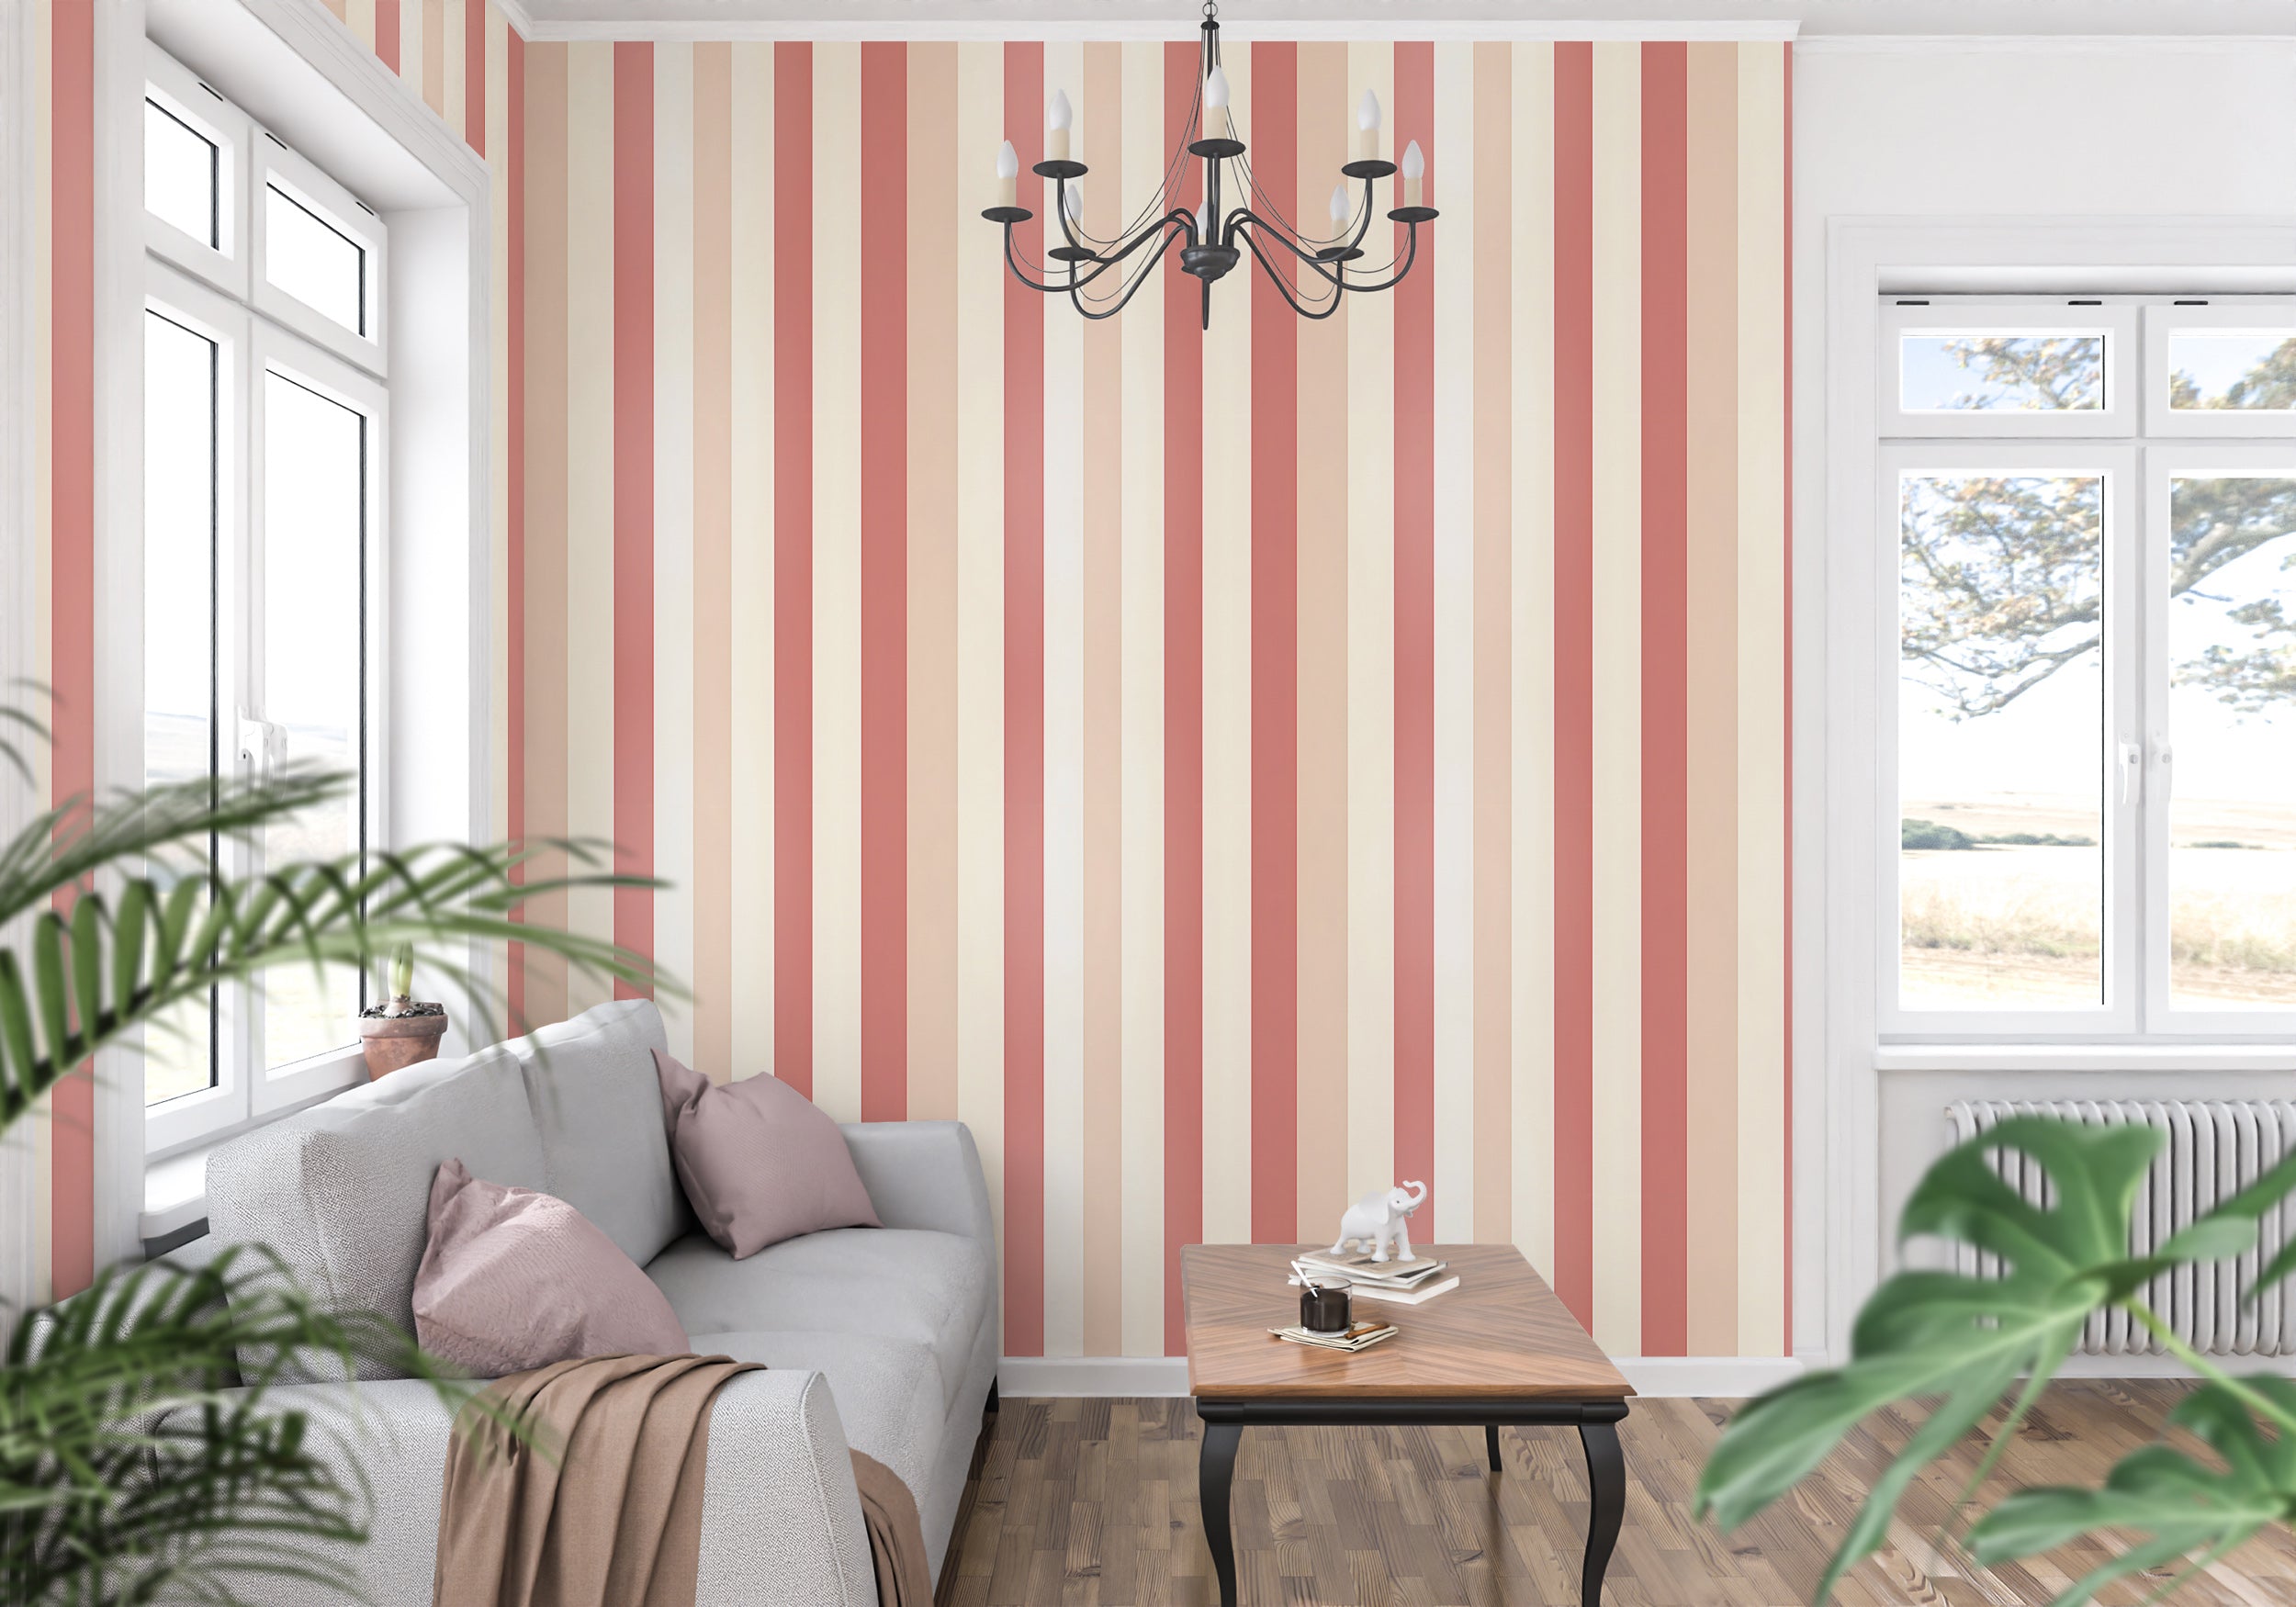 Stylish Home Decor with Stripes